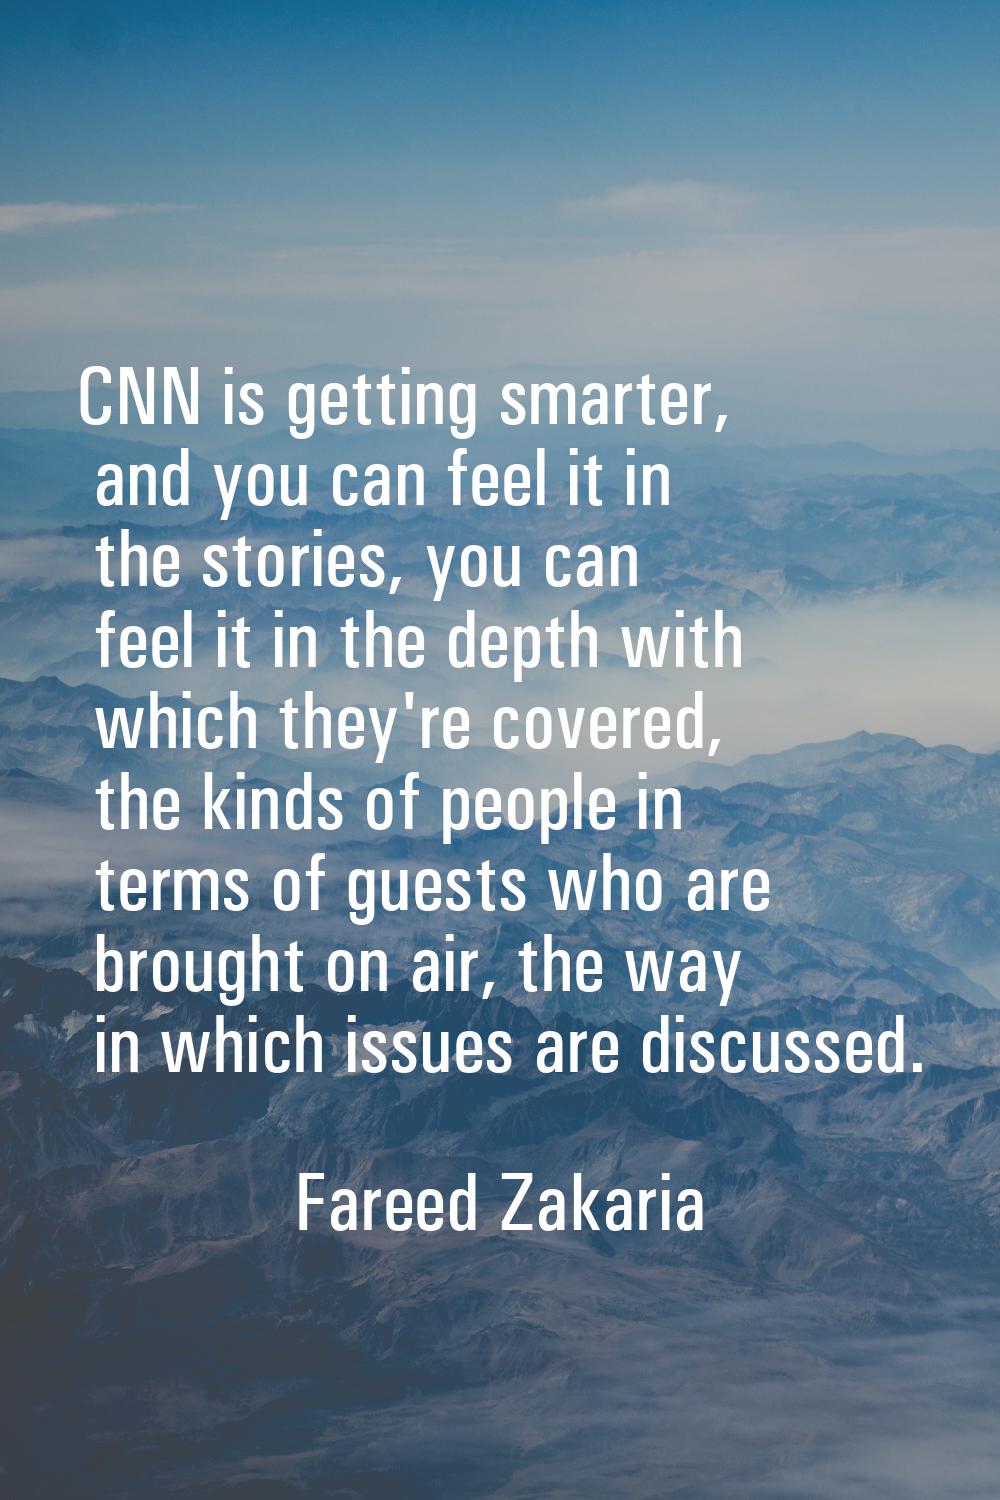 CNN is getting smarter, and you can feel it in the stories, you can feel it in the depth with which